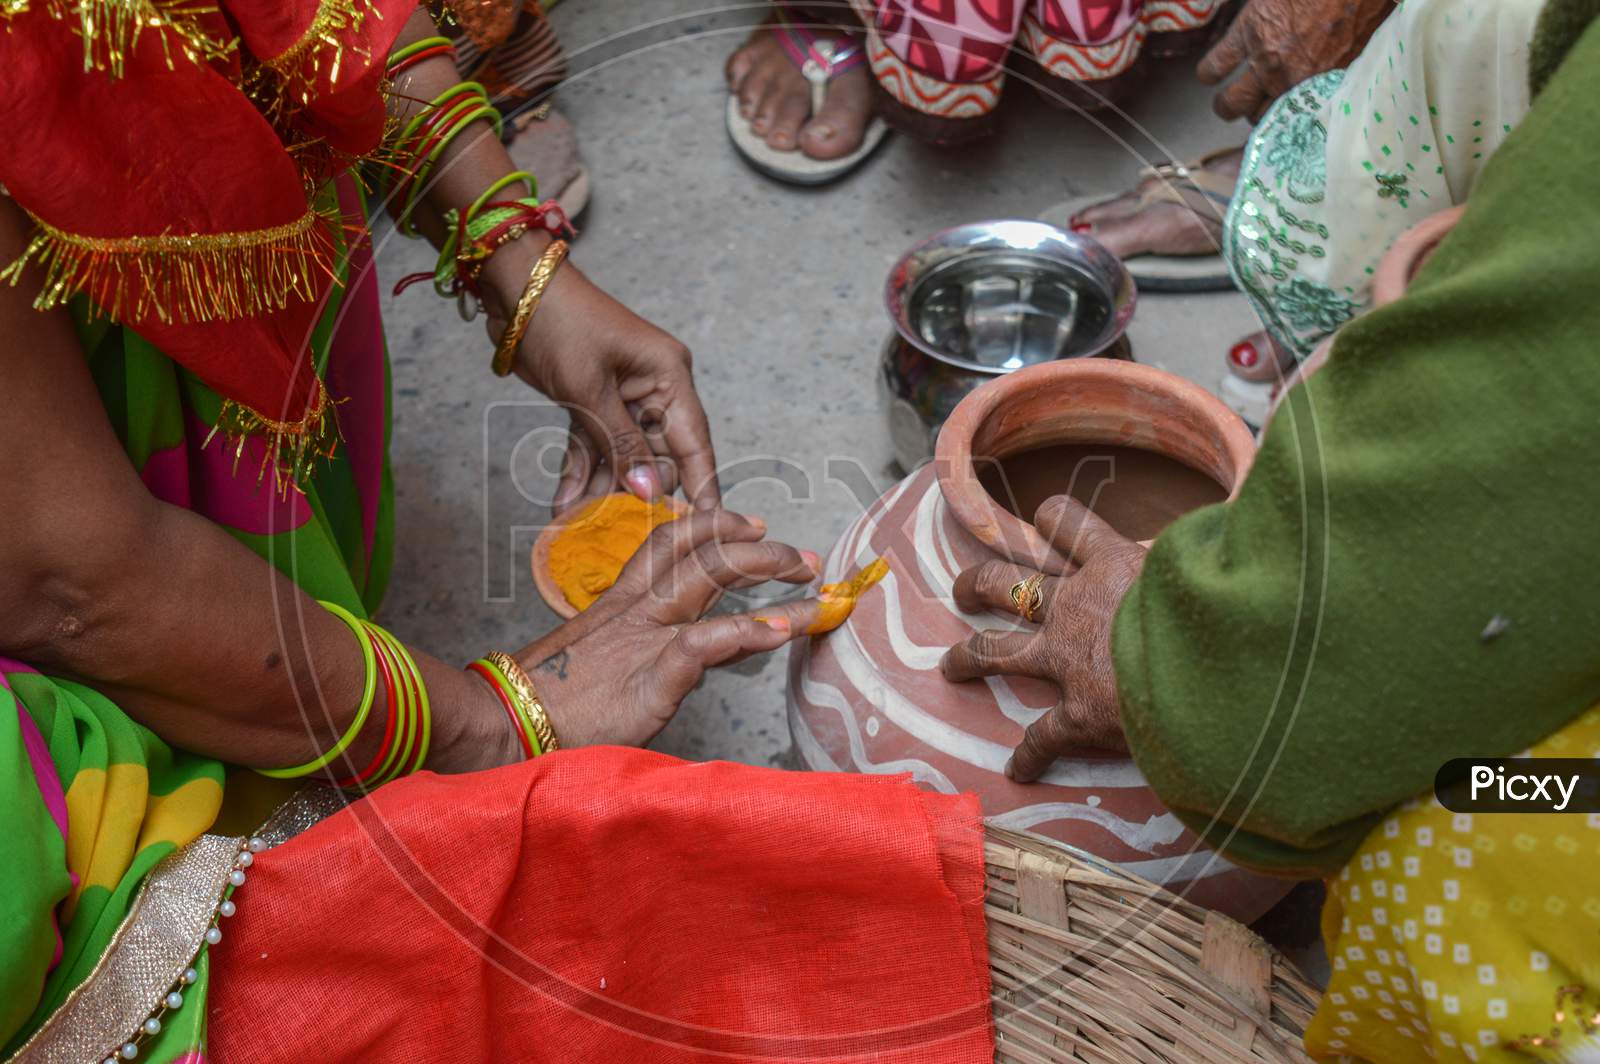 Lady Putting Turmeric On Clay Pot In Indian Weddings.